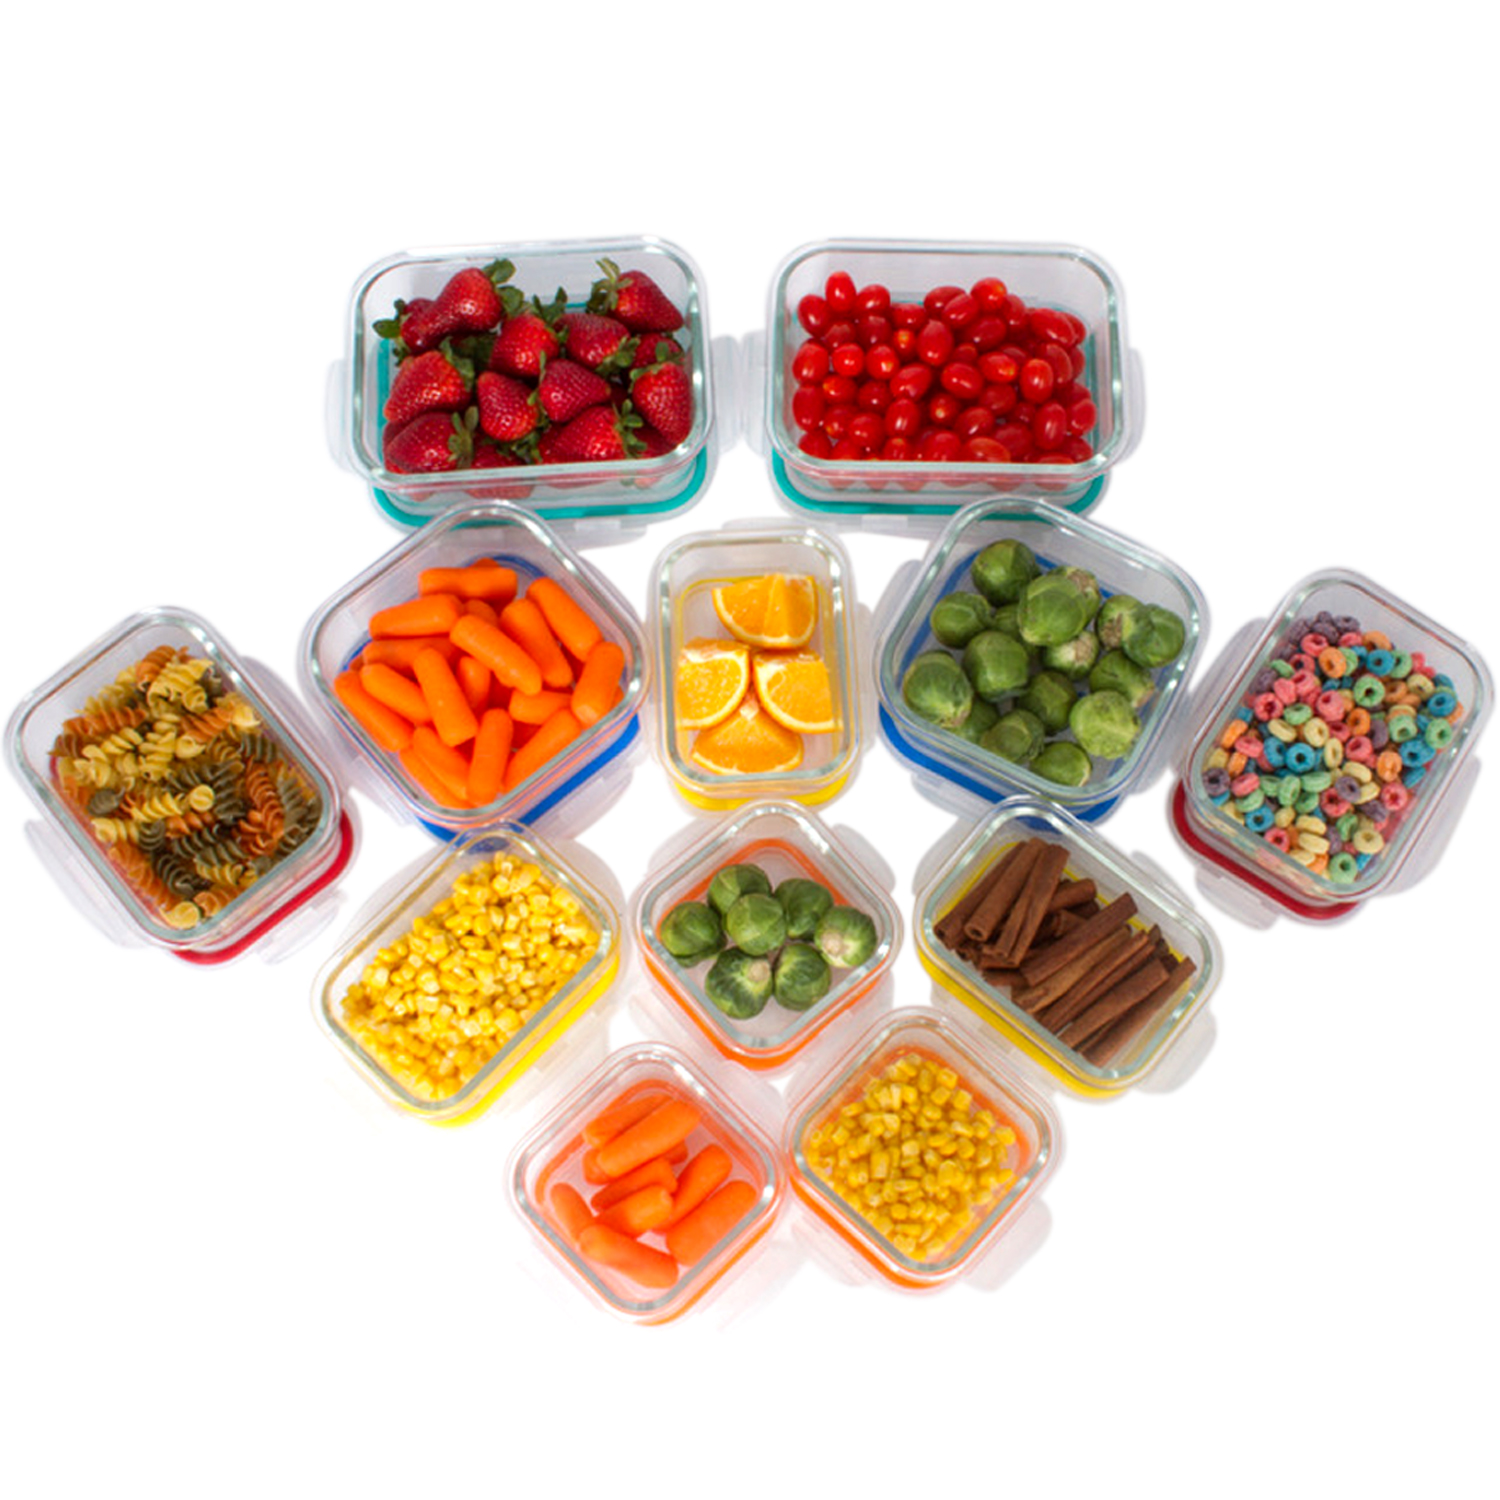 Imperial Home 24 pcs. Glass Meal Prep Storage Container Set W/ Snap Locking Lid - image 5 of 8